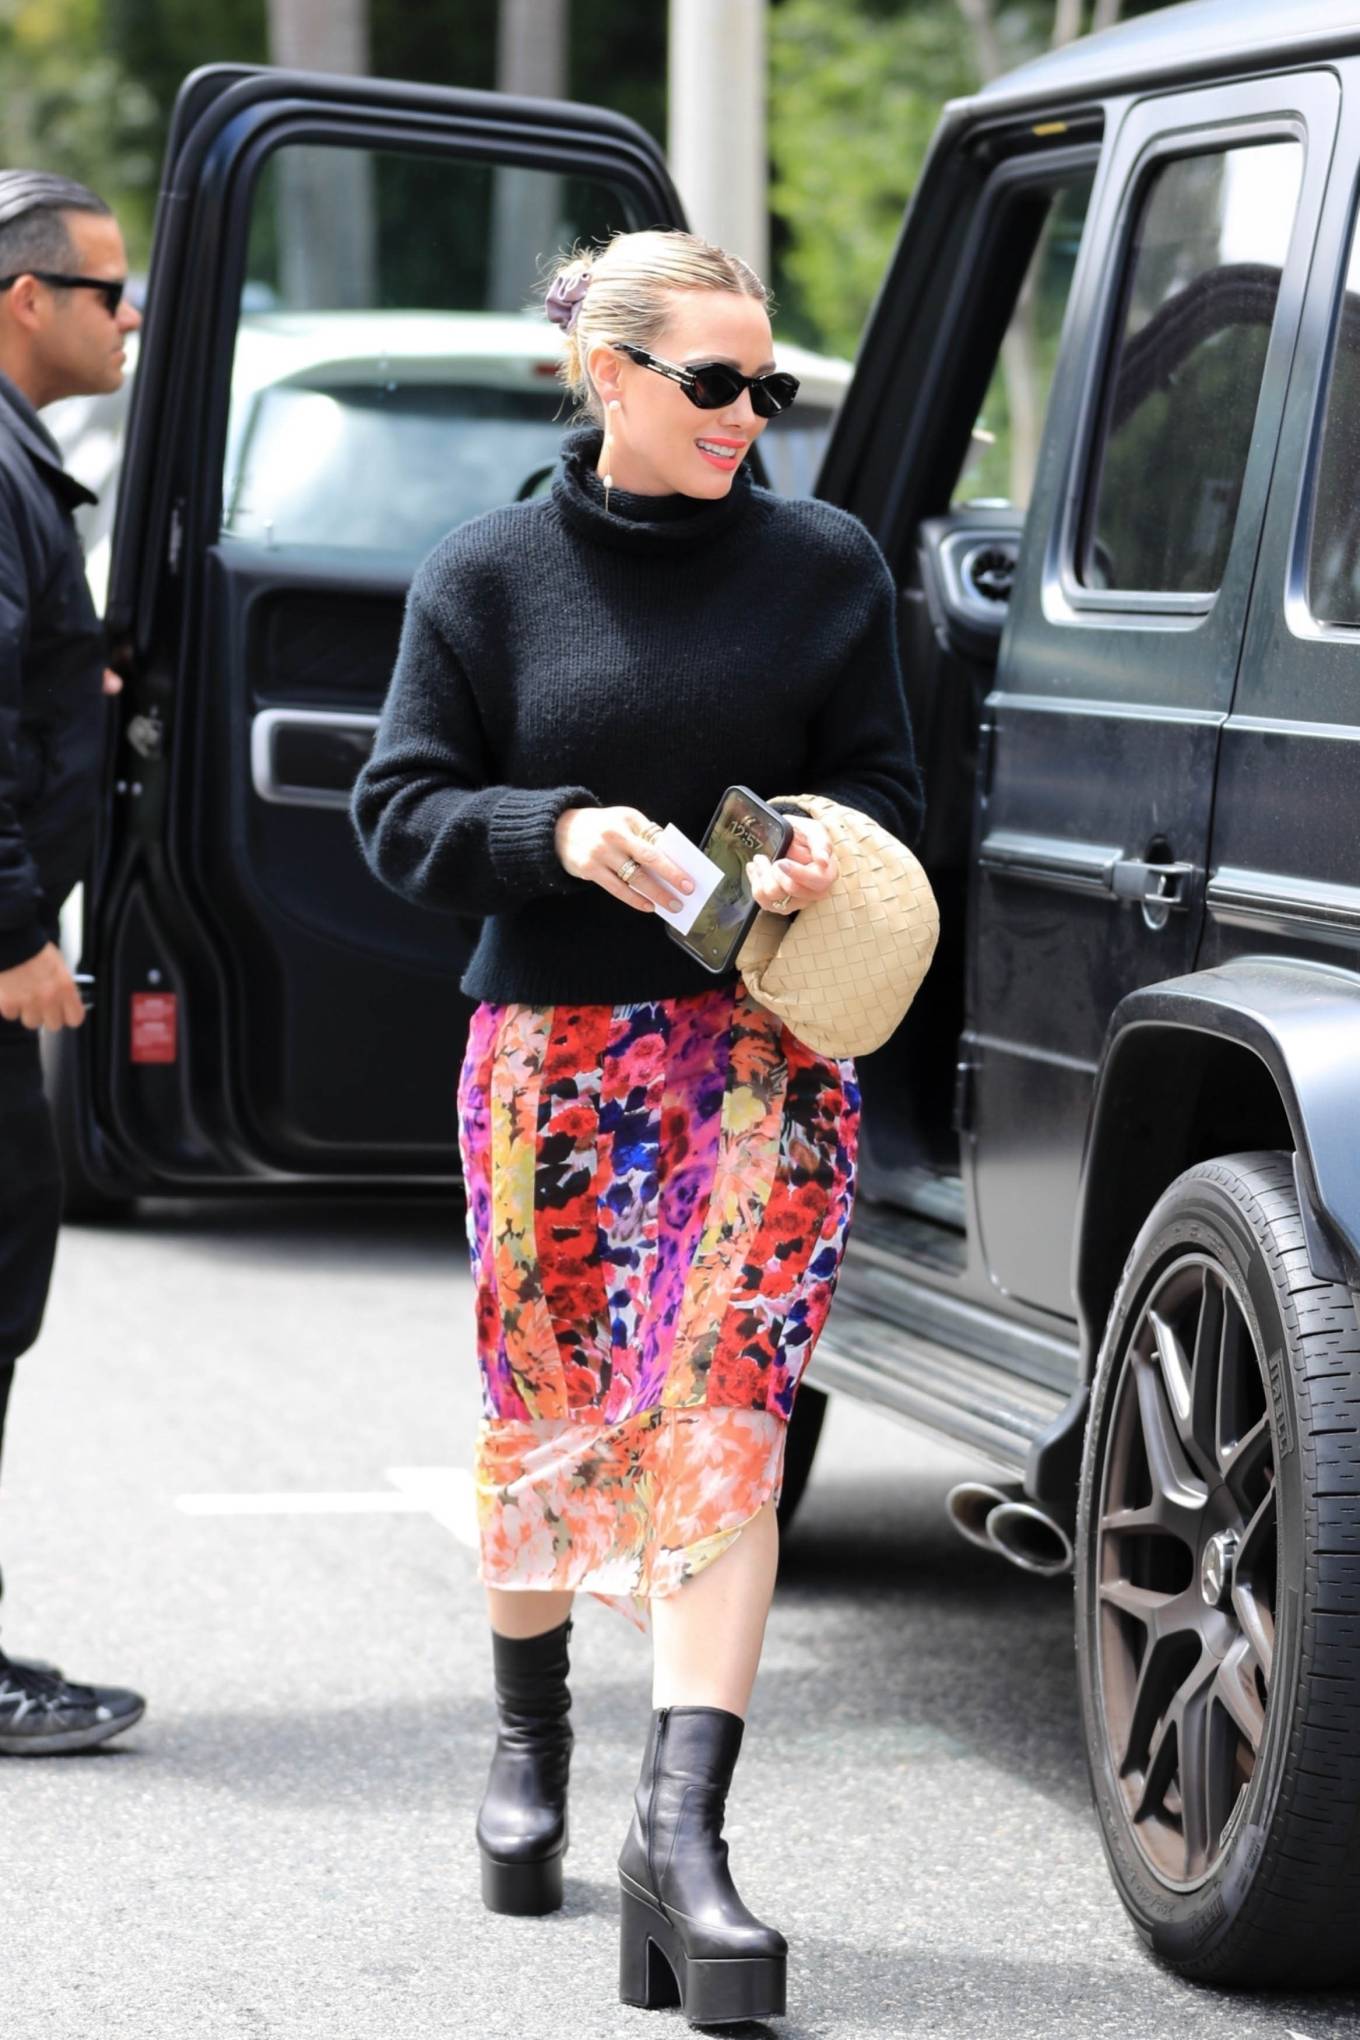 Hilary Duff - In a floral print skirt heading to a meeting in Beverly Hills